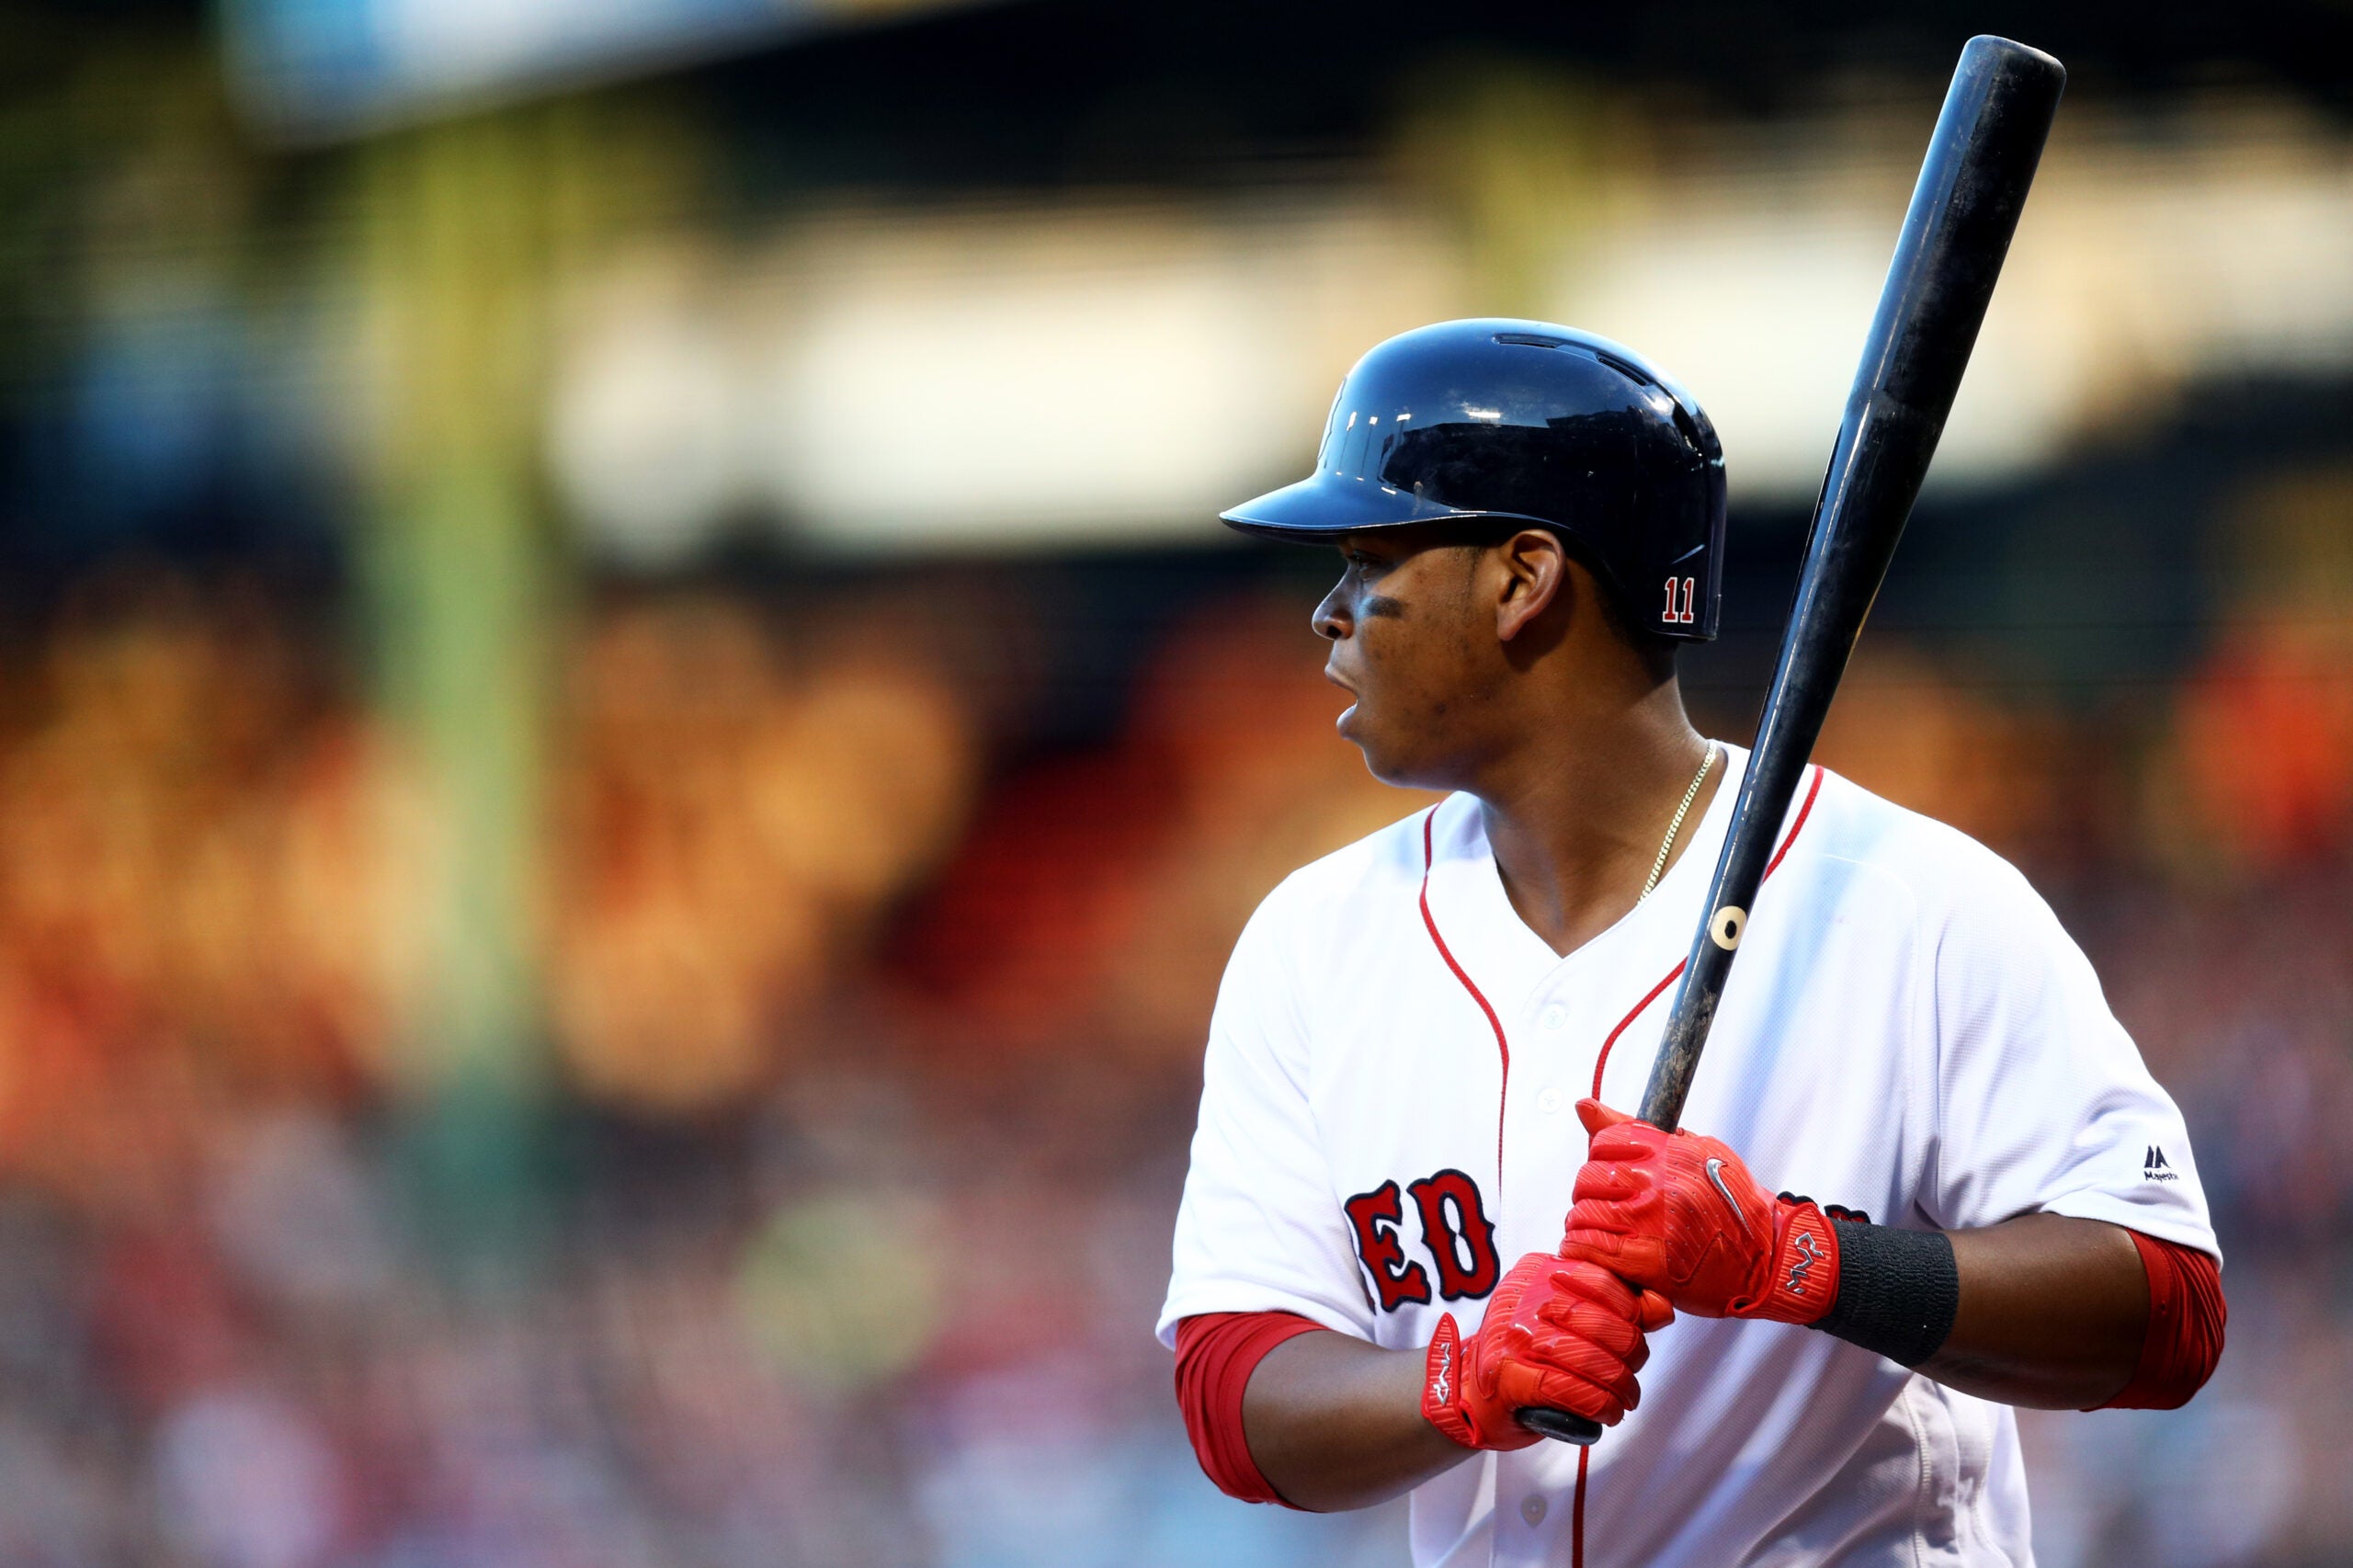 Rafael Devers' home run made for a hilarious photo of fans trying